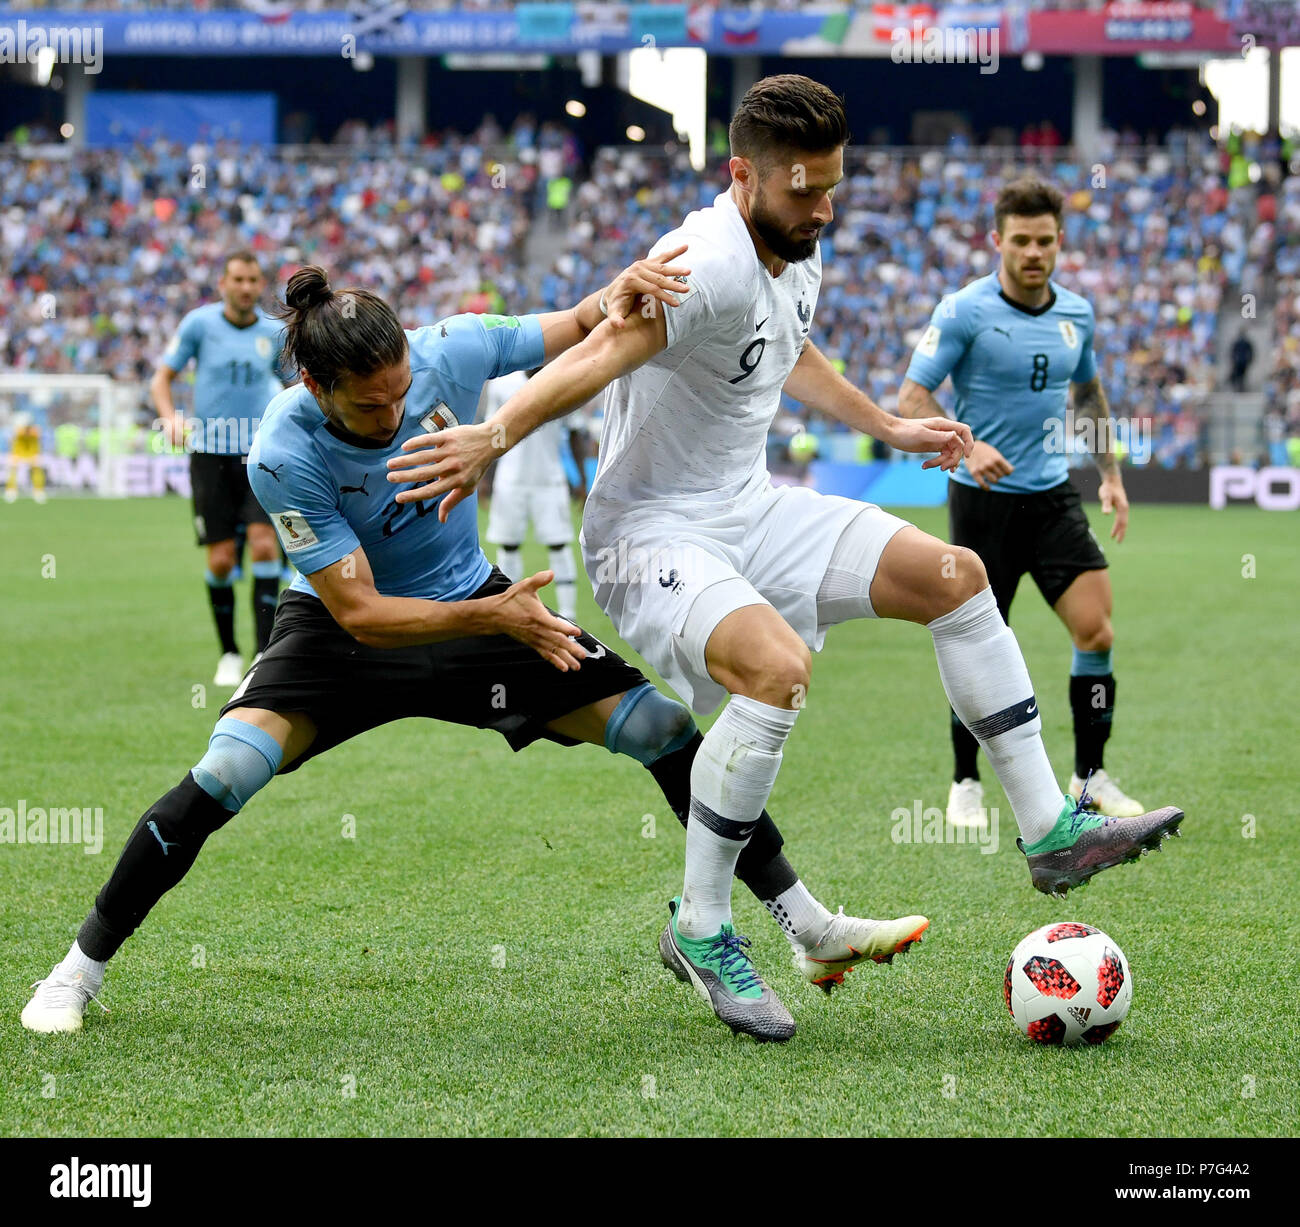 Nizhny Novgorod, Russia. 6th July, 2018. Martin Caceres (2nd L) of Uruguay vies with Olivier Giroud (2nd R) of France during the 2018 FIFA World Cup quarter-final match between Uruguay and France in Nizhny Novgorod, Russia, July 6, 2018. Credit: Chen Cheng/Xinhua/Alamy Live News Stock Photo